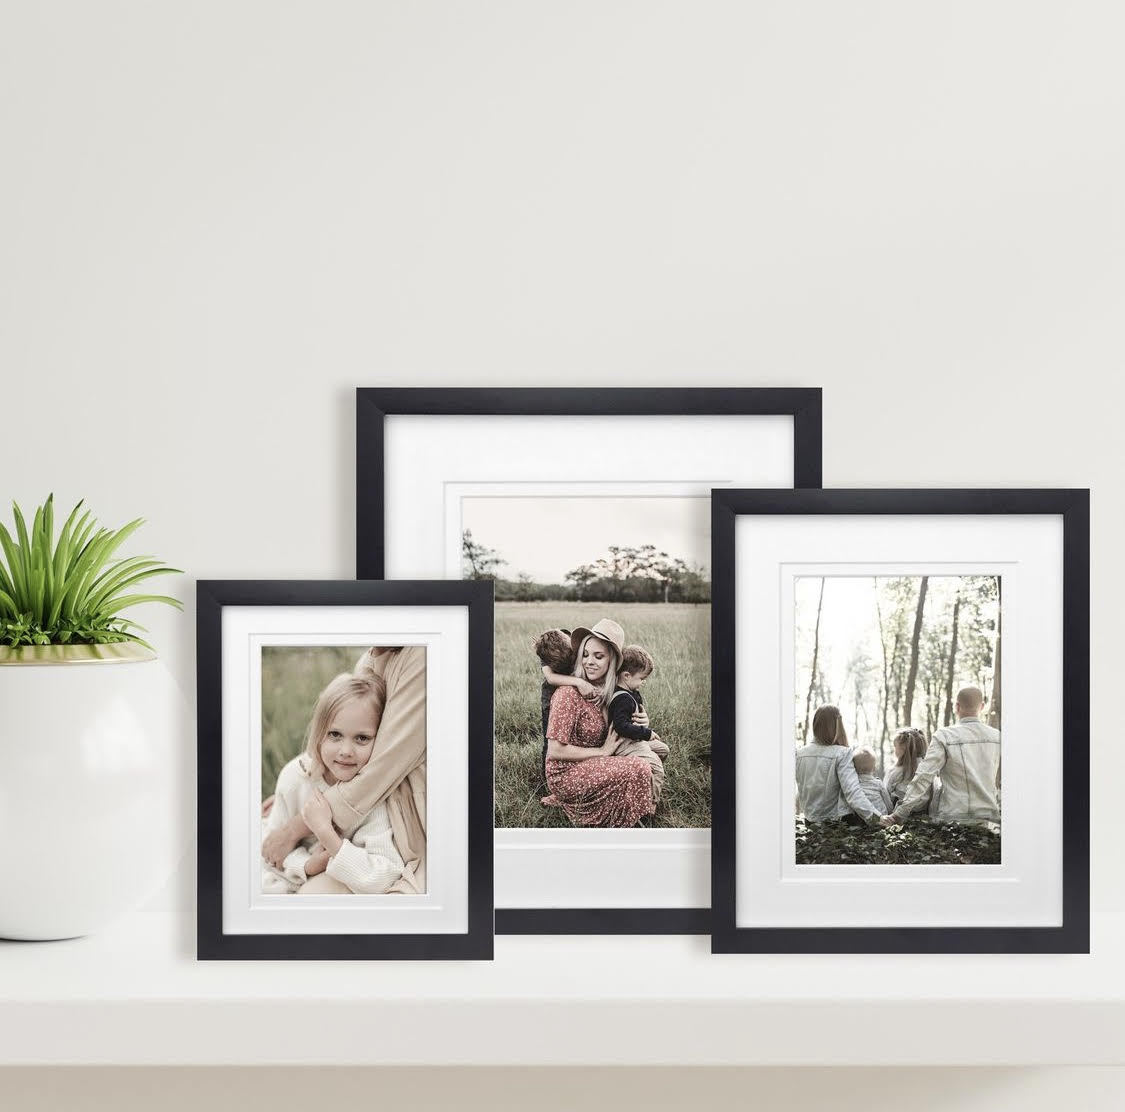 10x12” black timber frame with matboard to suit 6x8” photo